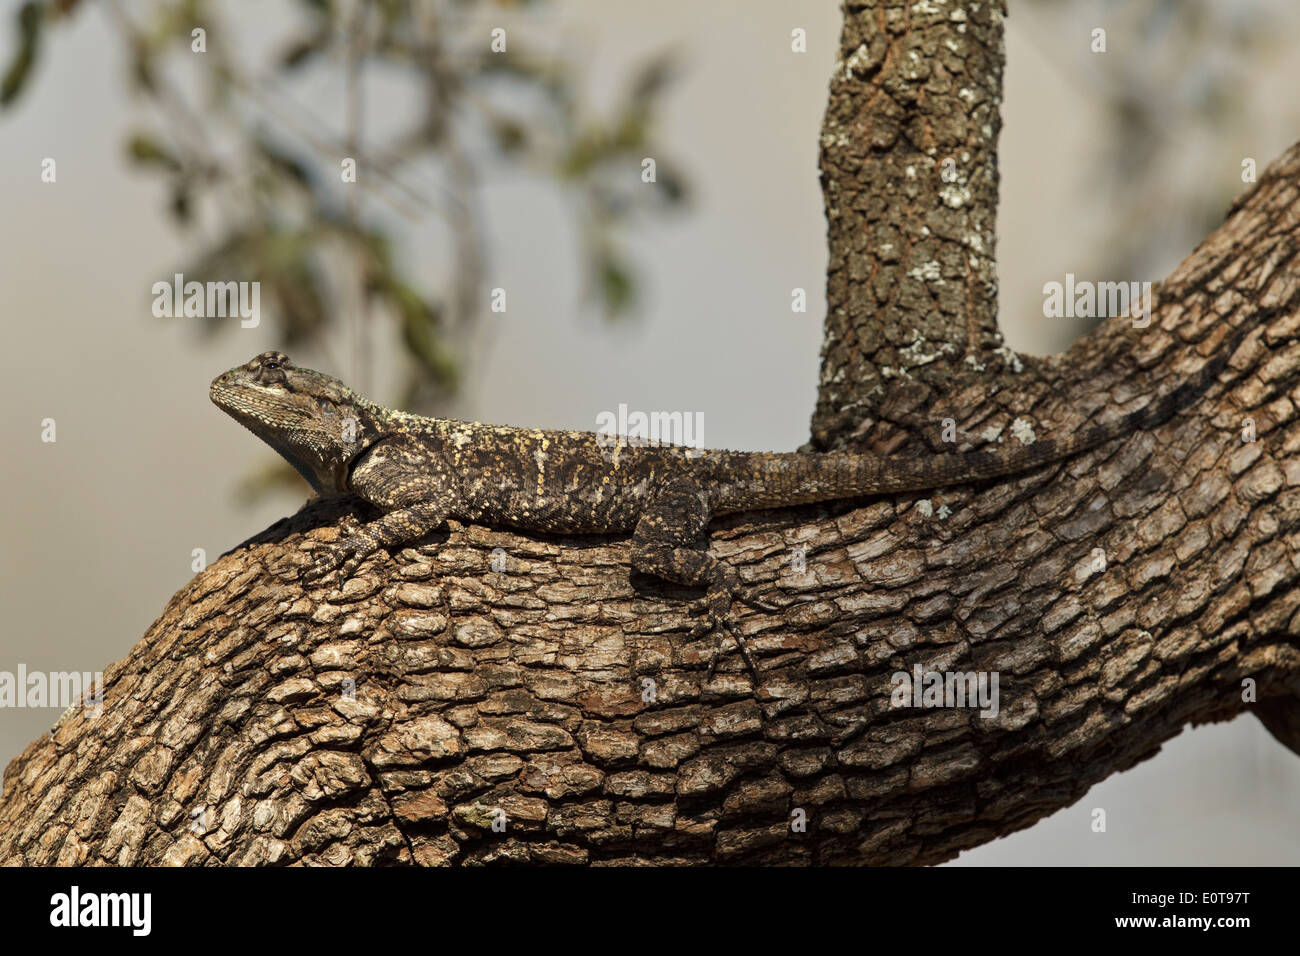 Blue-throated Agama (Acanthocercus atricollis) also known as Southern Tree Agama, Black-necked Agama, Kruger National Park, Stock Photo